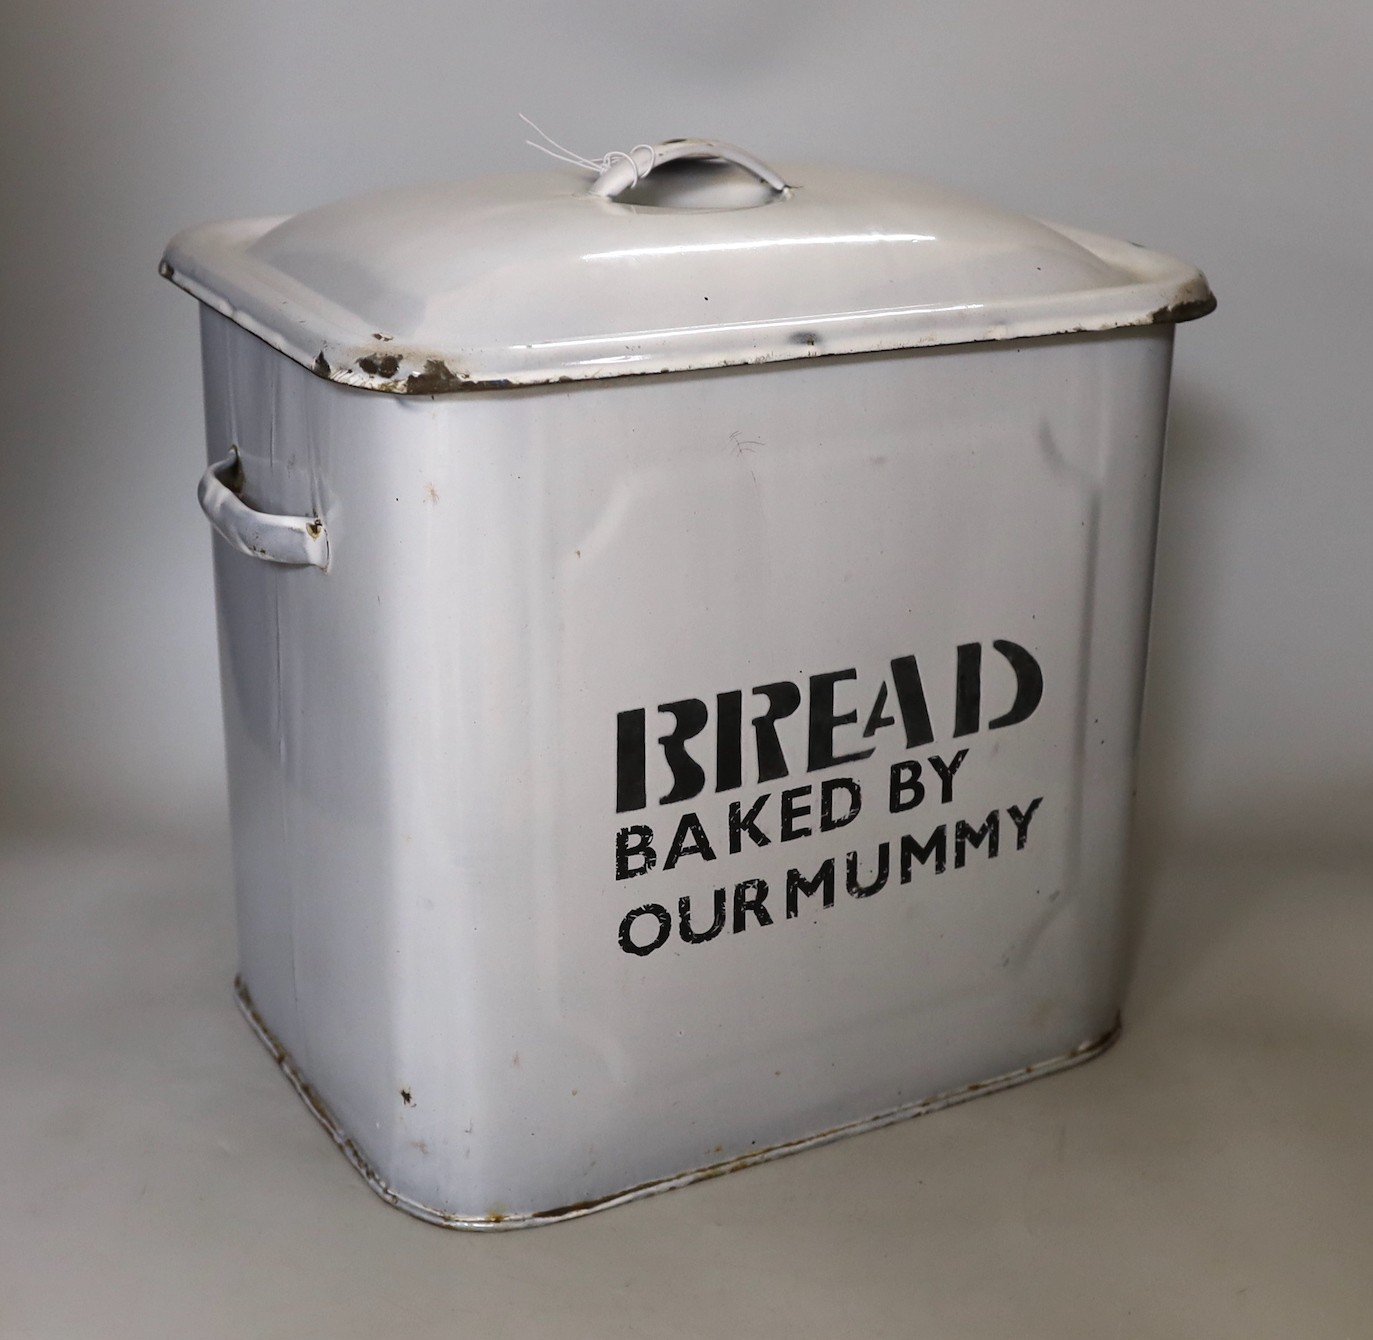 A vintage white enamel bread bin and cover, printed “Bread Baked By our Mummy”